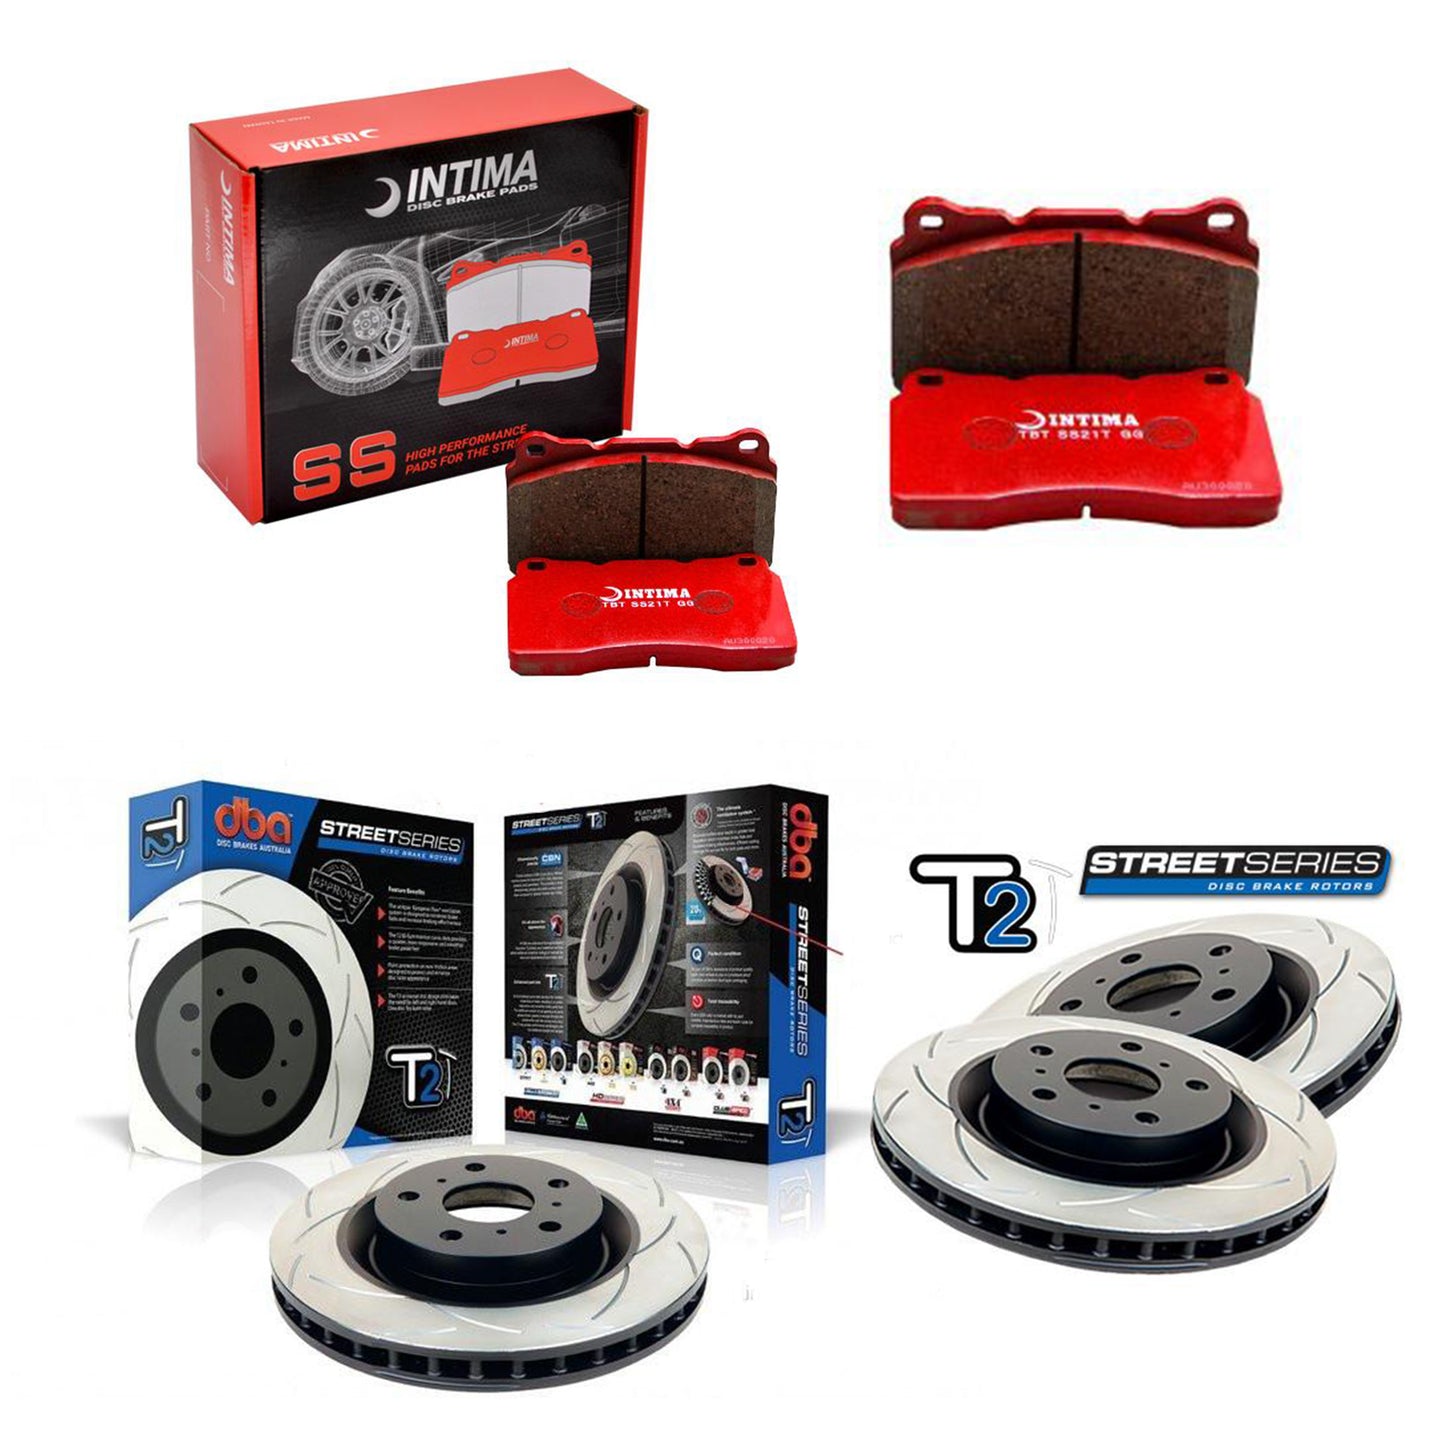 DBA + Intima - Front & Rear Brake Package - DBA T2 Slotted Rotors + Intima SS Brake pads - Forester SH (08-13)